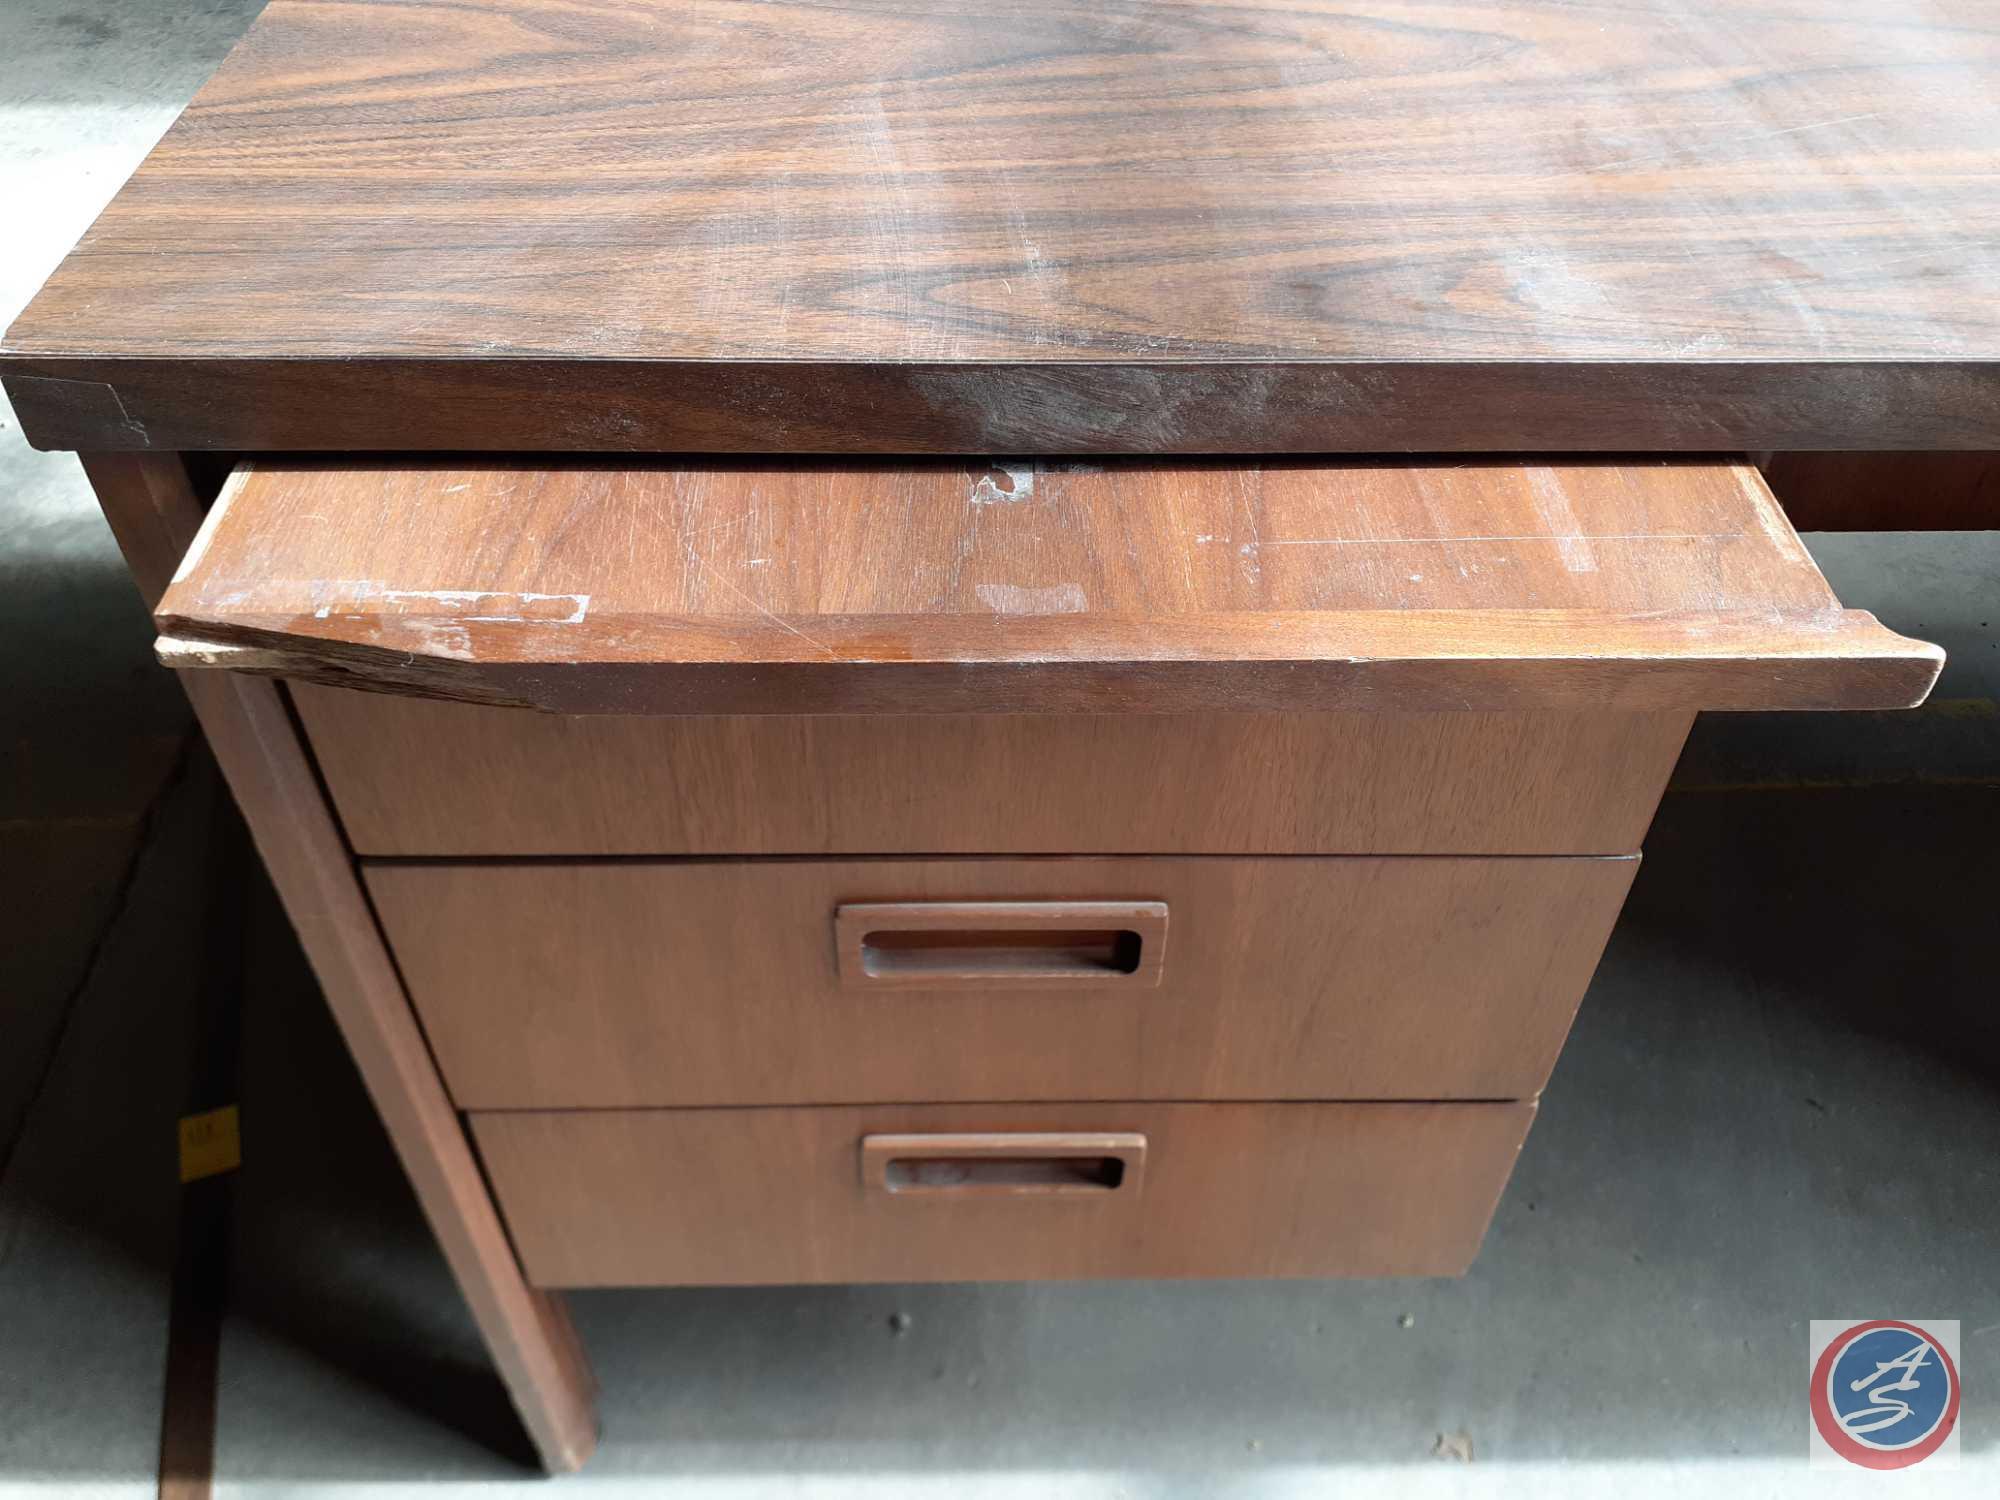 Antique / vintage wood desk with three drawers on the left and two drawers on the right. There is a